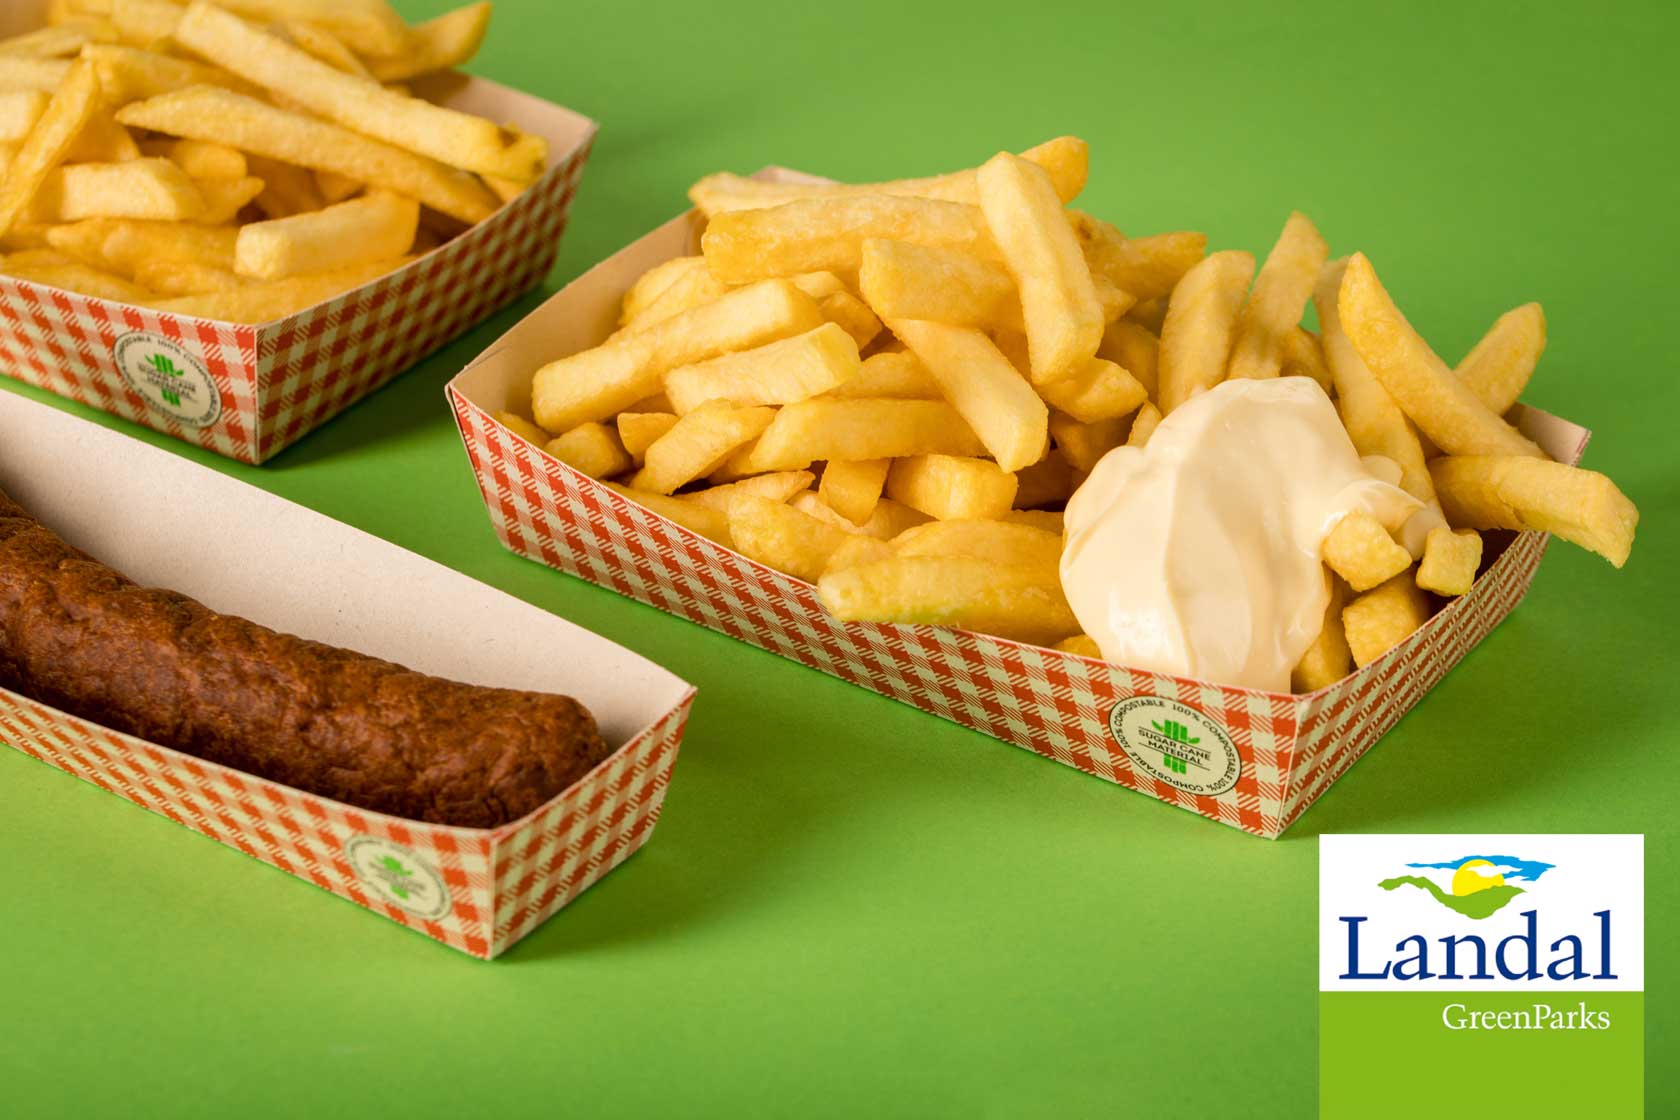 PaperWise compostable eco friendly snack togo disposable packaging Landal_GreenParks_logo